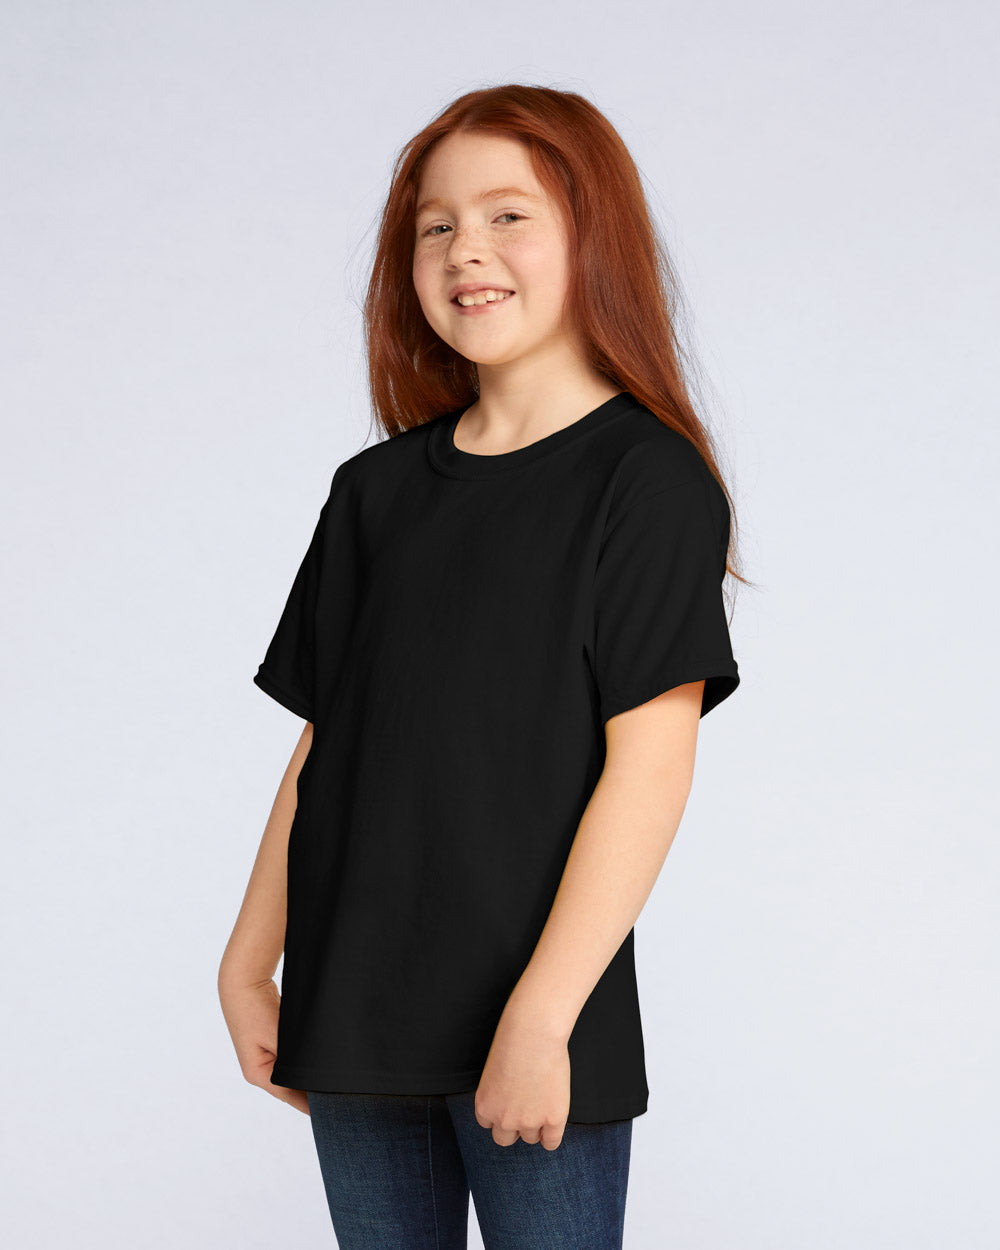 Softstyle Youth T-Shirt